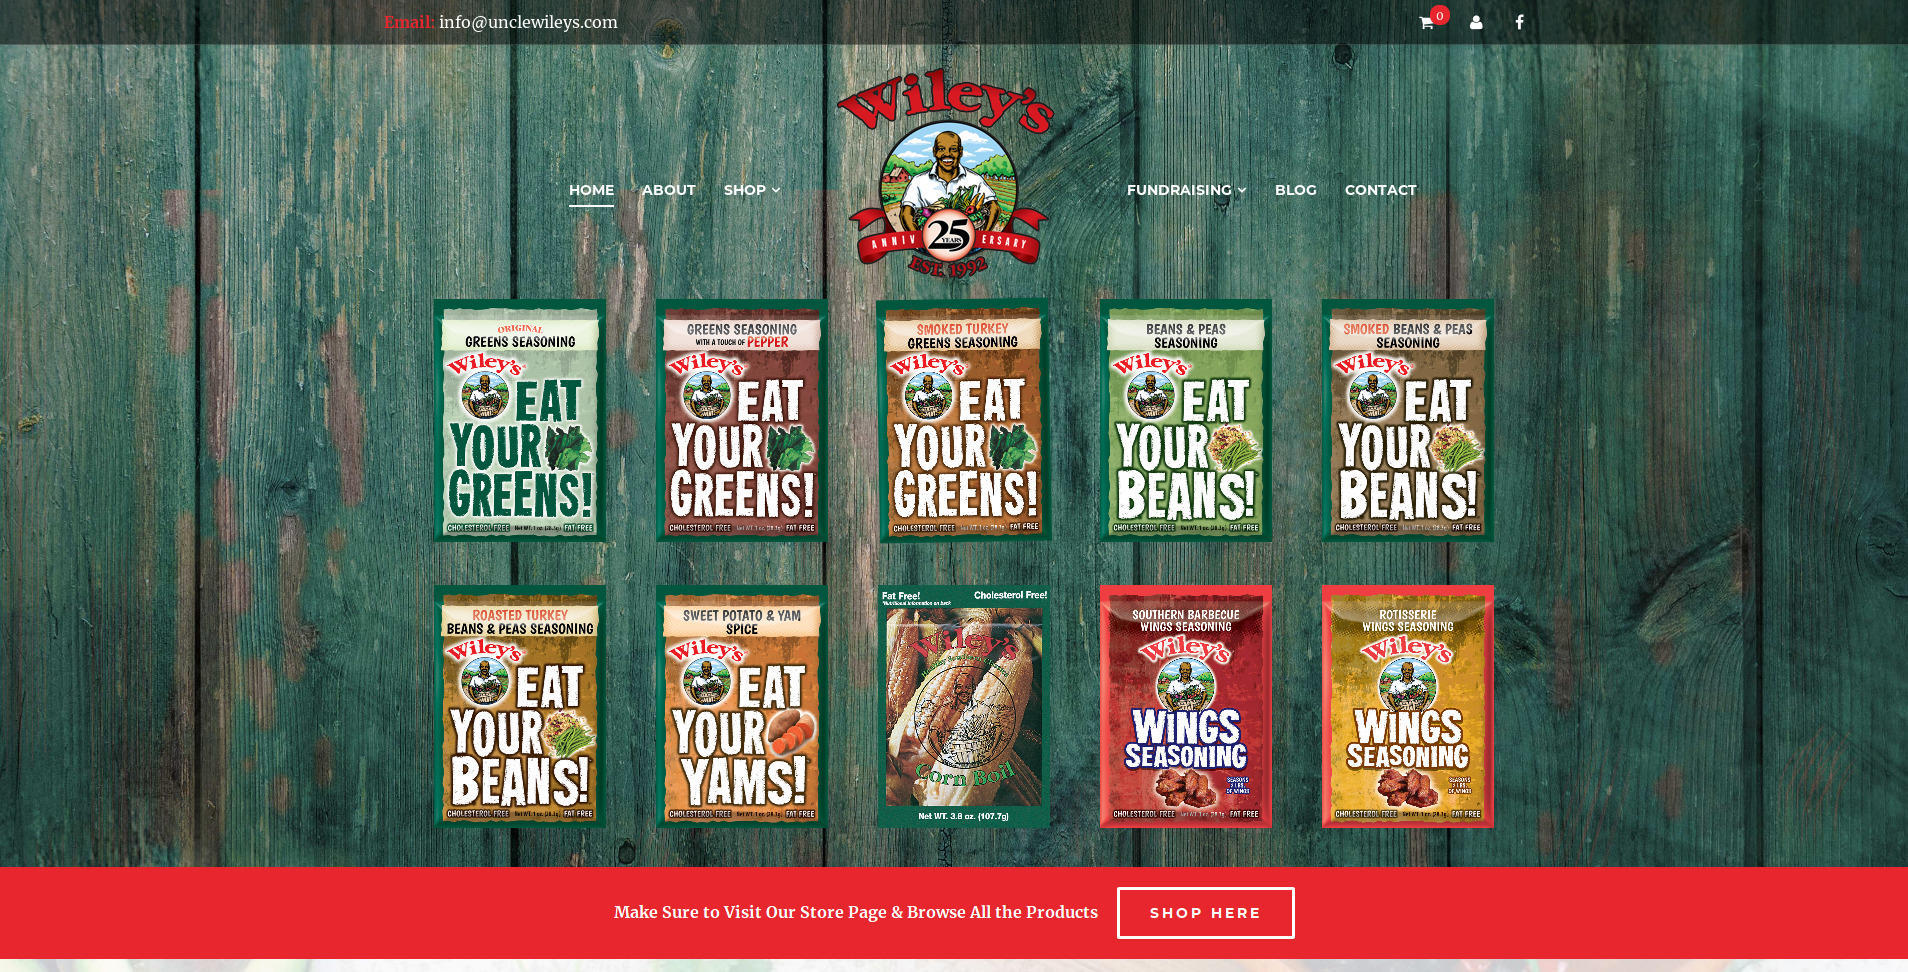 https://indie.systems/wp-content/uploads/2018/07/Screenshot_2018-07-24-Uncle-Wileys-Southern-Spices-Seasonings.jpg